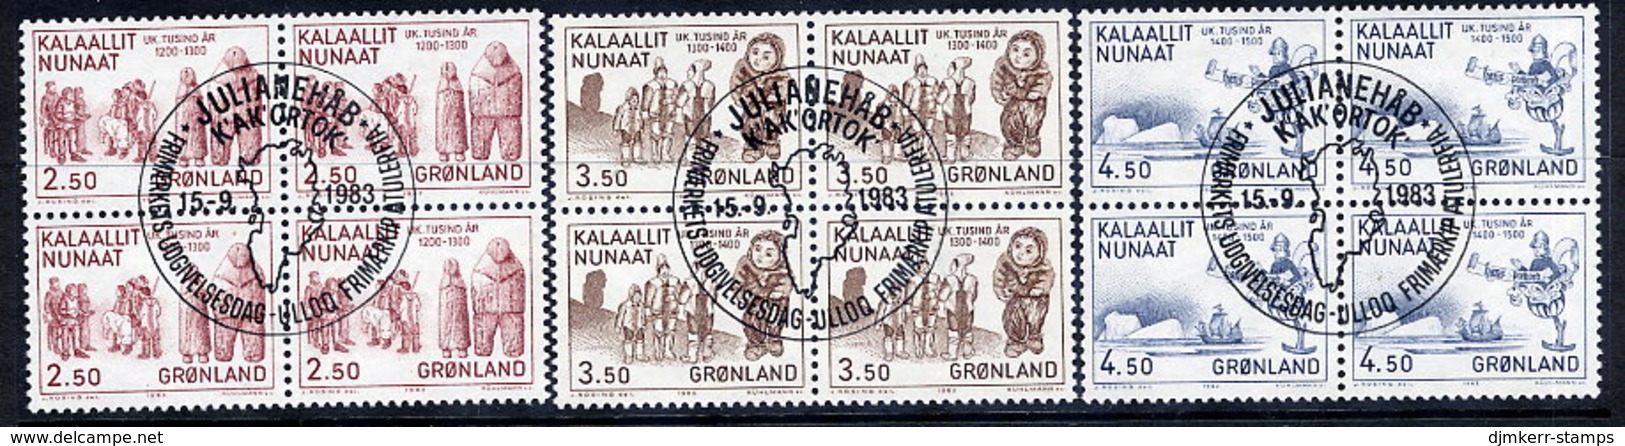 GREENLAND 1983 Millenary Of Settlement In Used  Blocks Of 4.  Michel 143-45 - Usados